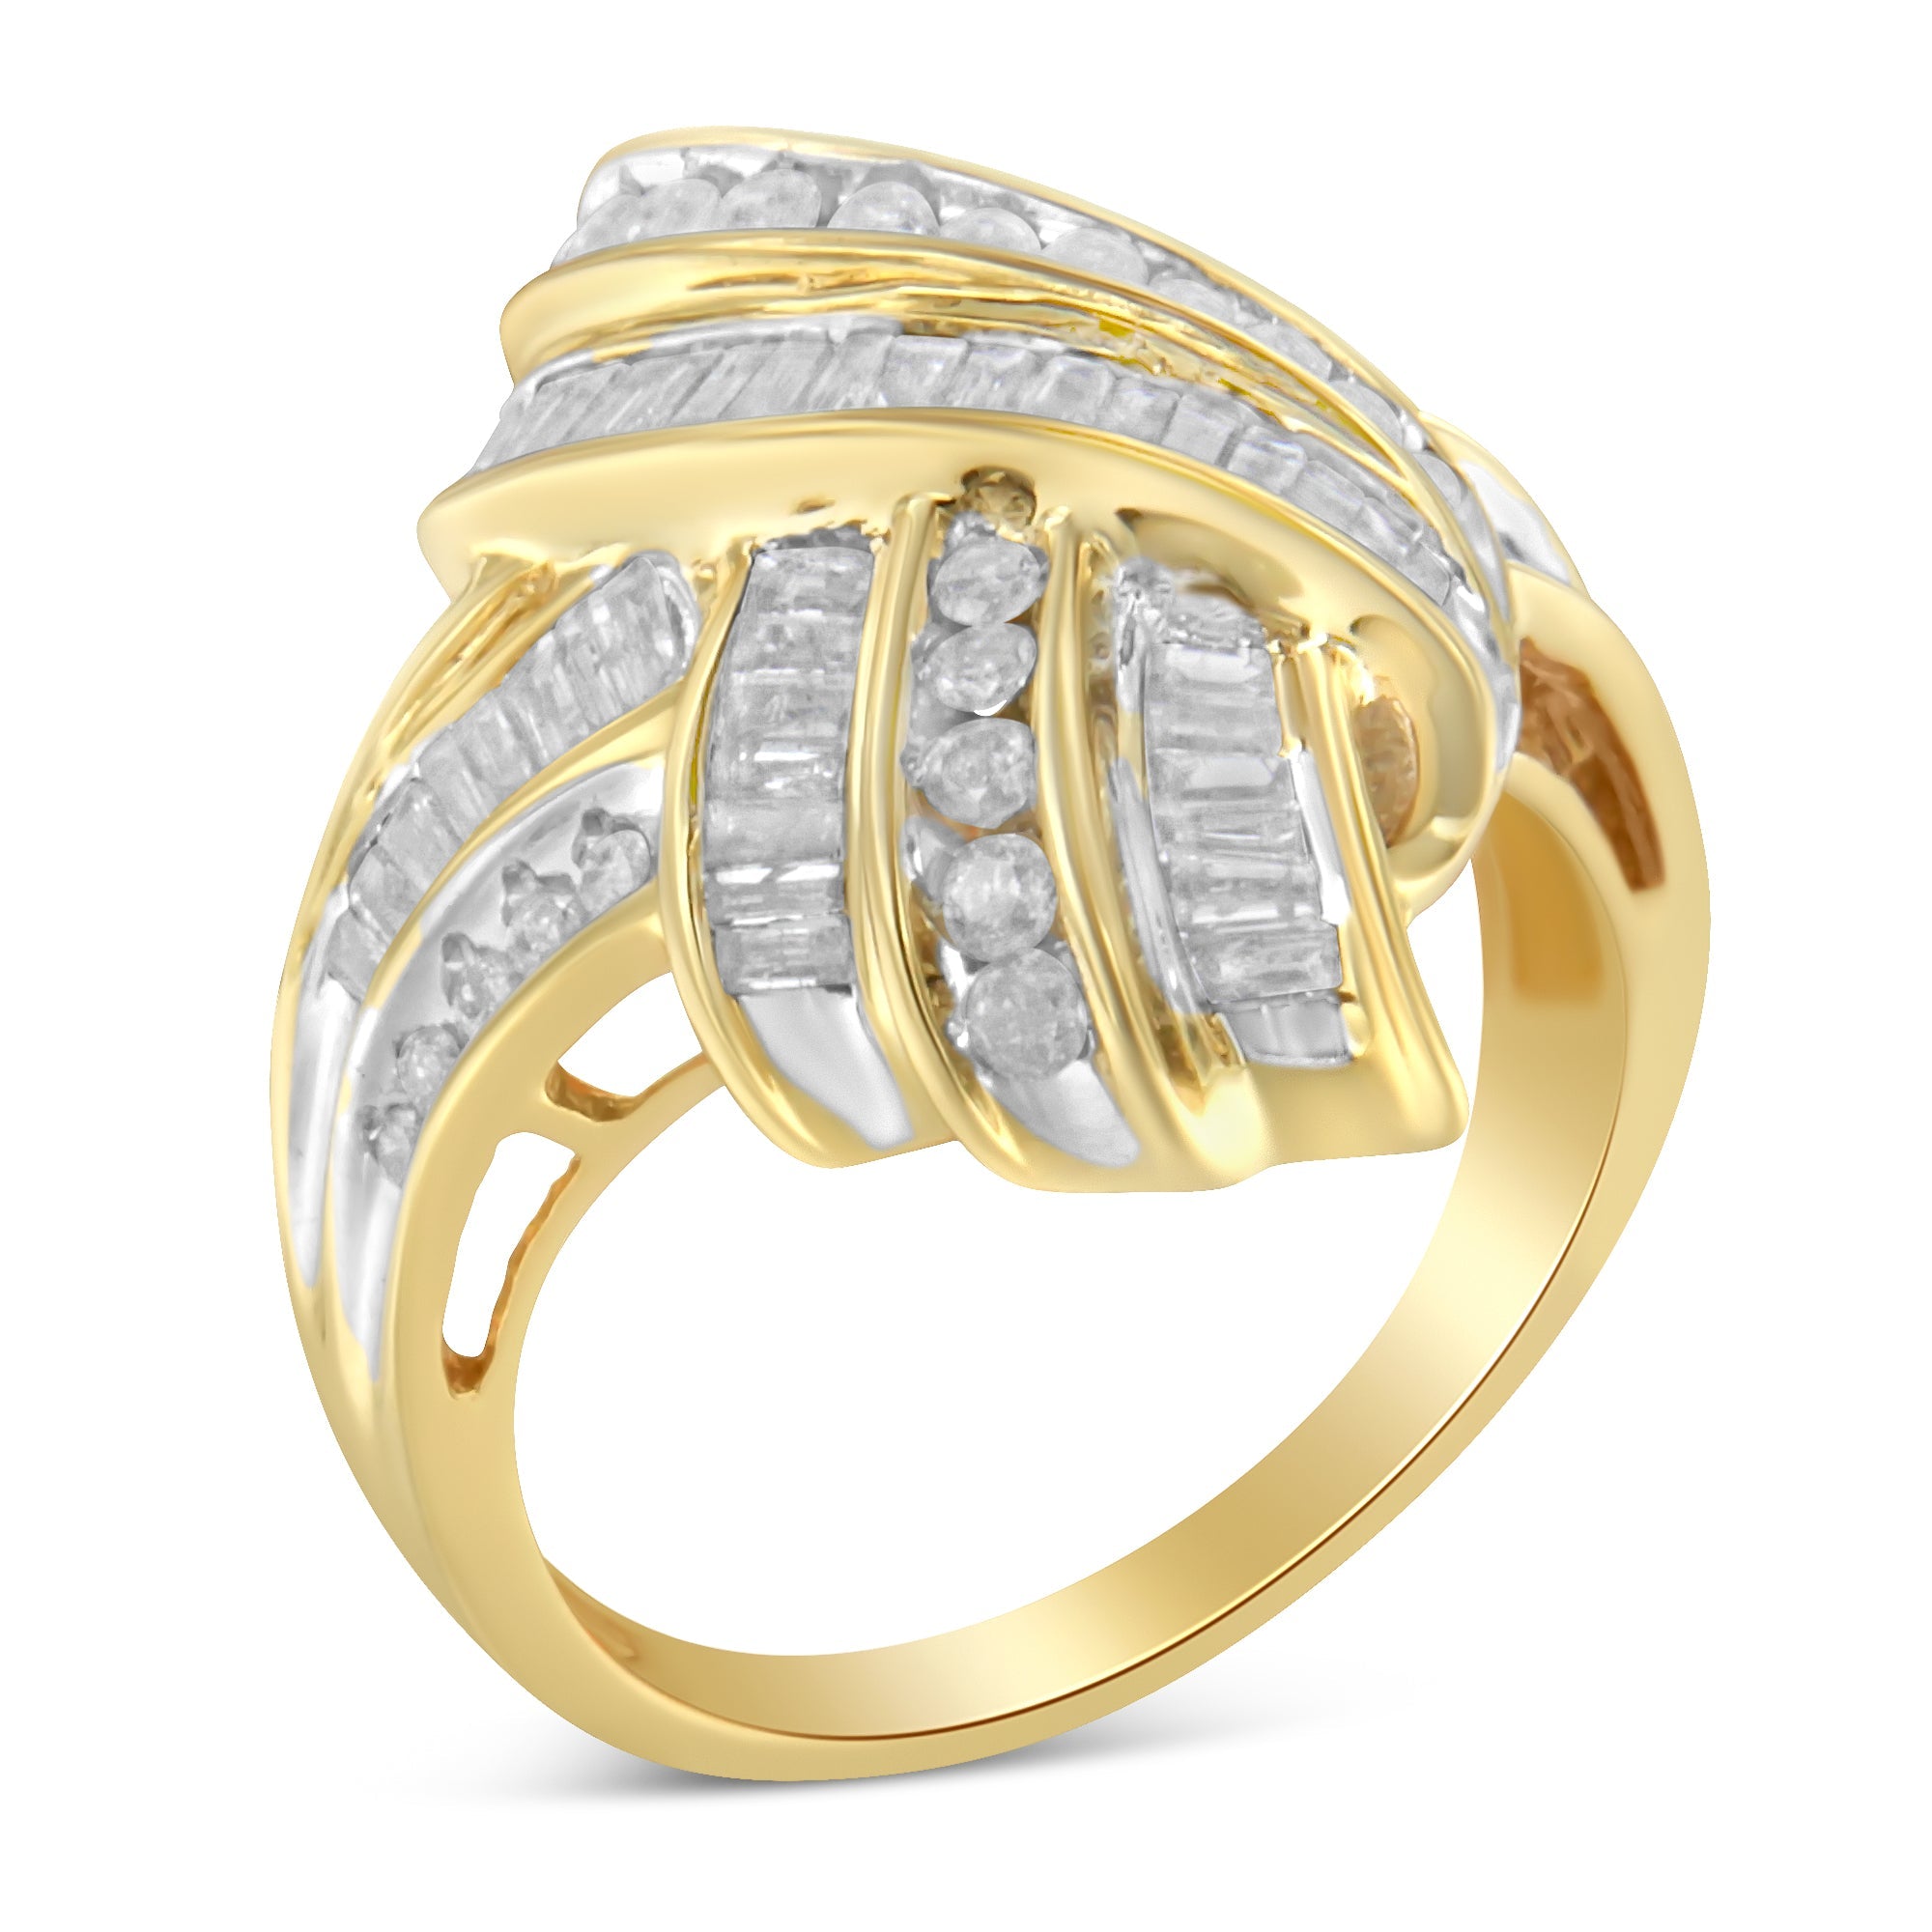 10K-Yellow-Gold-Plated-.925-Sterling-Silver-1.0-Cttw-Round-&-Baguette-Diamond-Knot-Channel-Statement-Ring-(I-J-Color,-I2-I3-Clarity)-Size-8-Rings